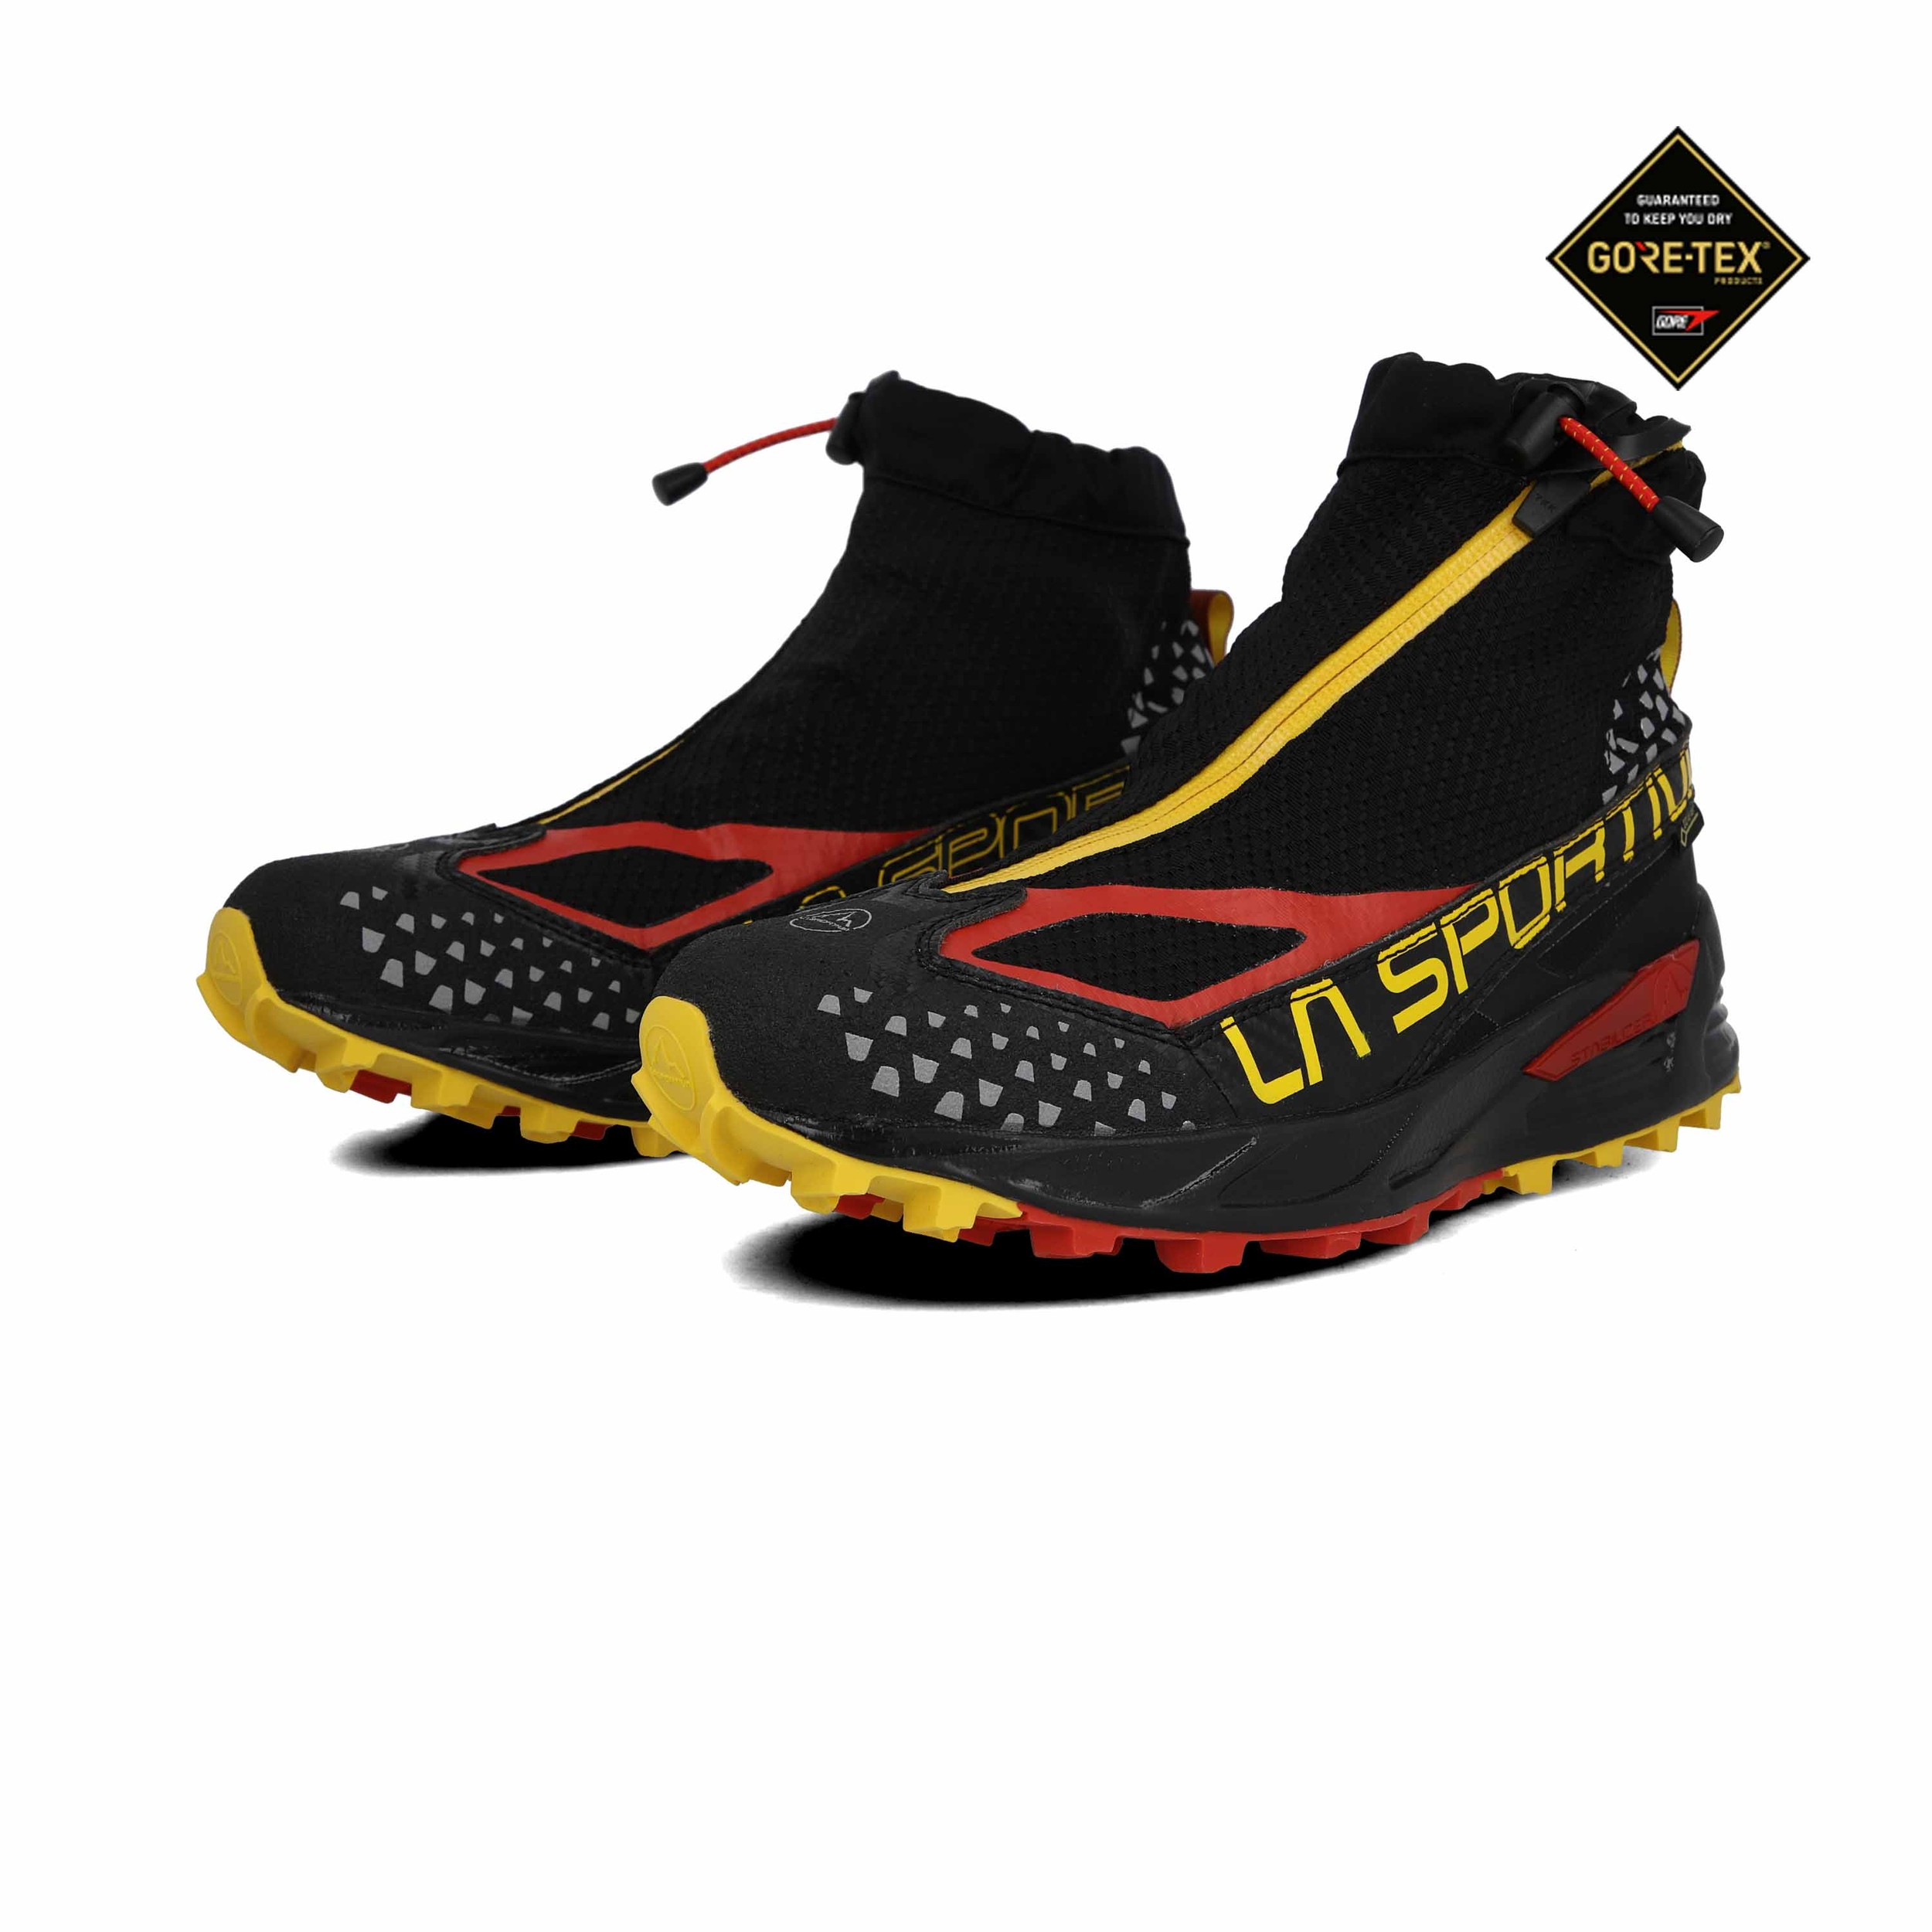 La Sportiva Crossover 2.0 GORE-TEX Trail Running Shoes - SS20